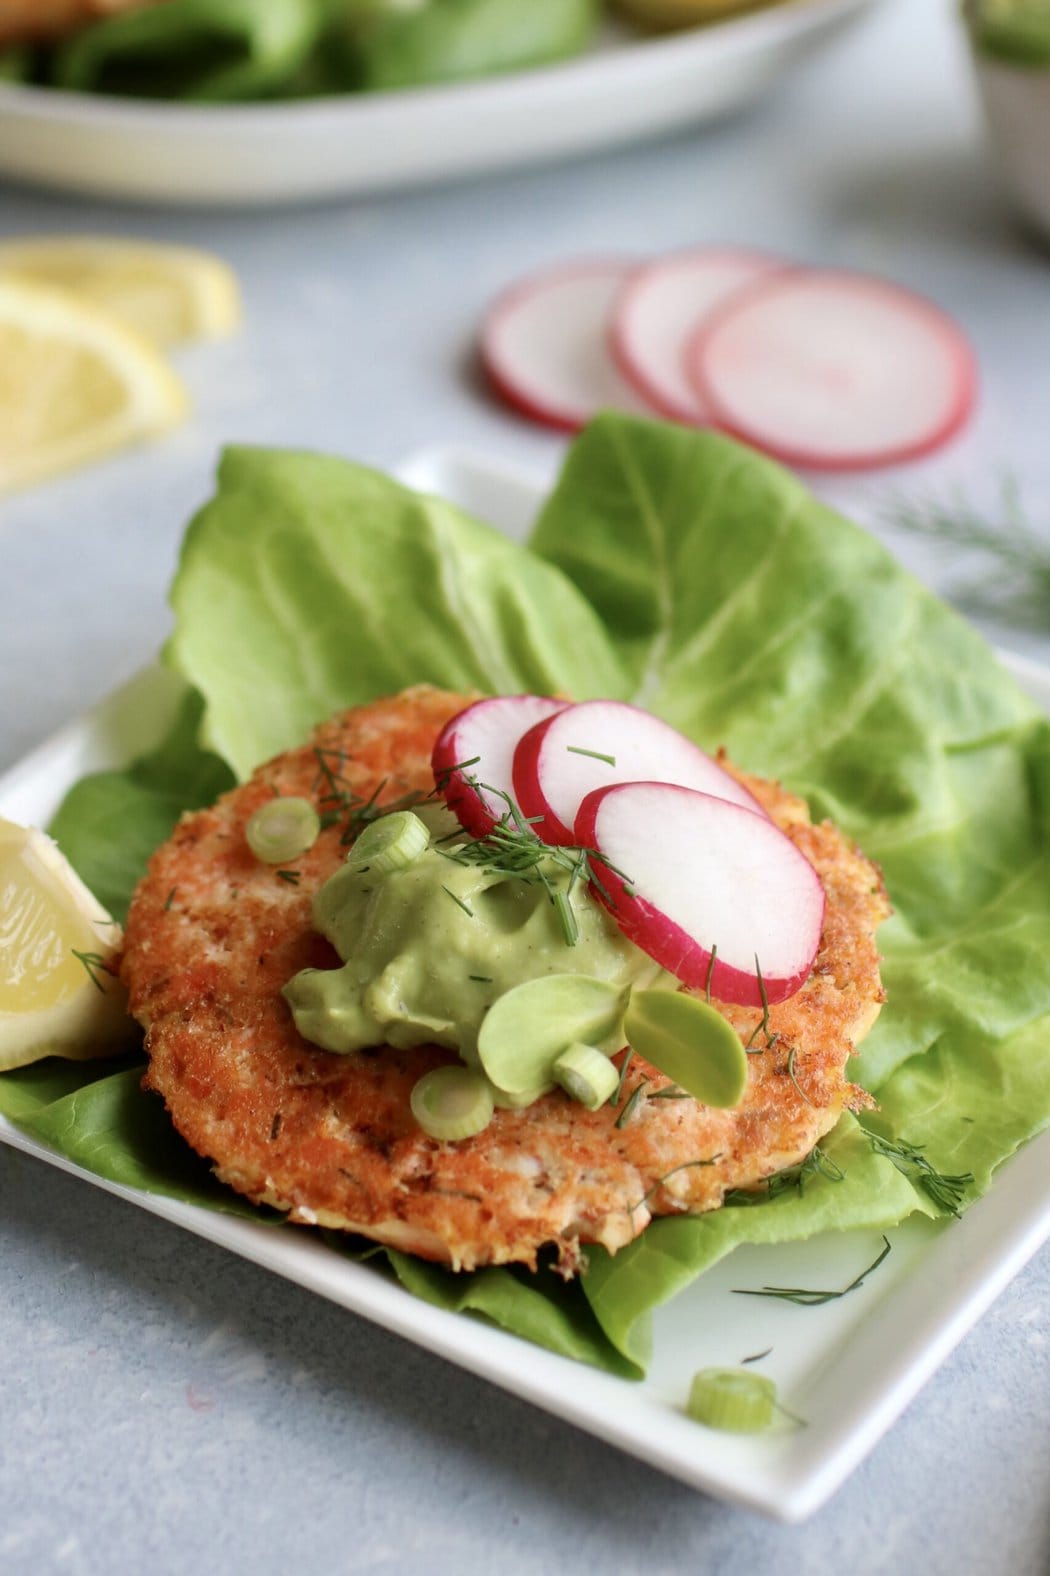 Easy Salmon Burgers - Together to Eat - Family Meals